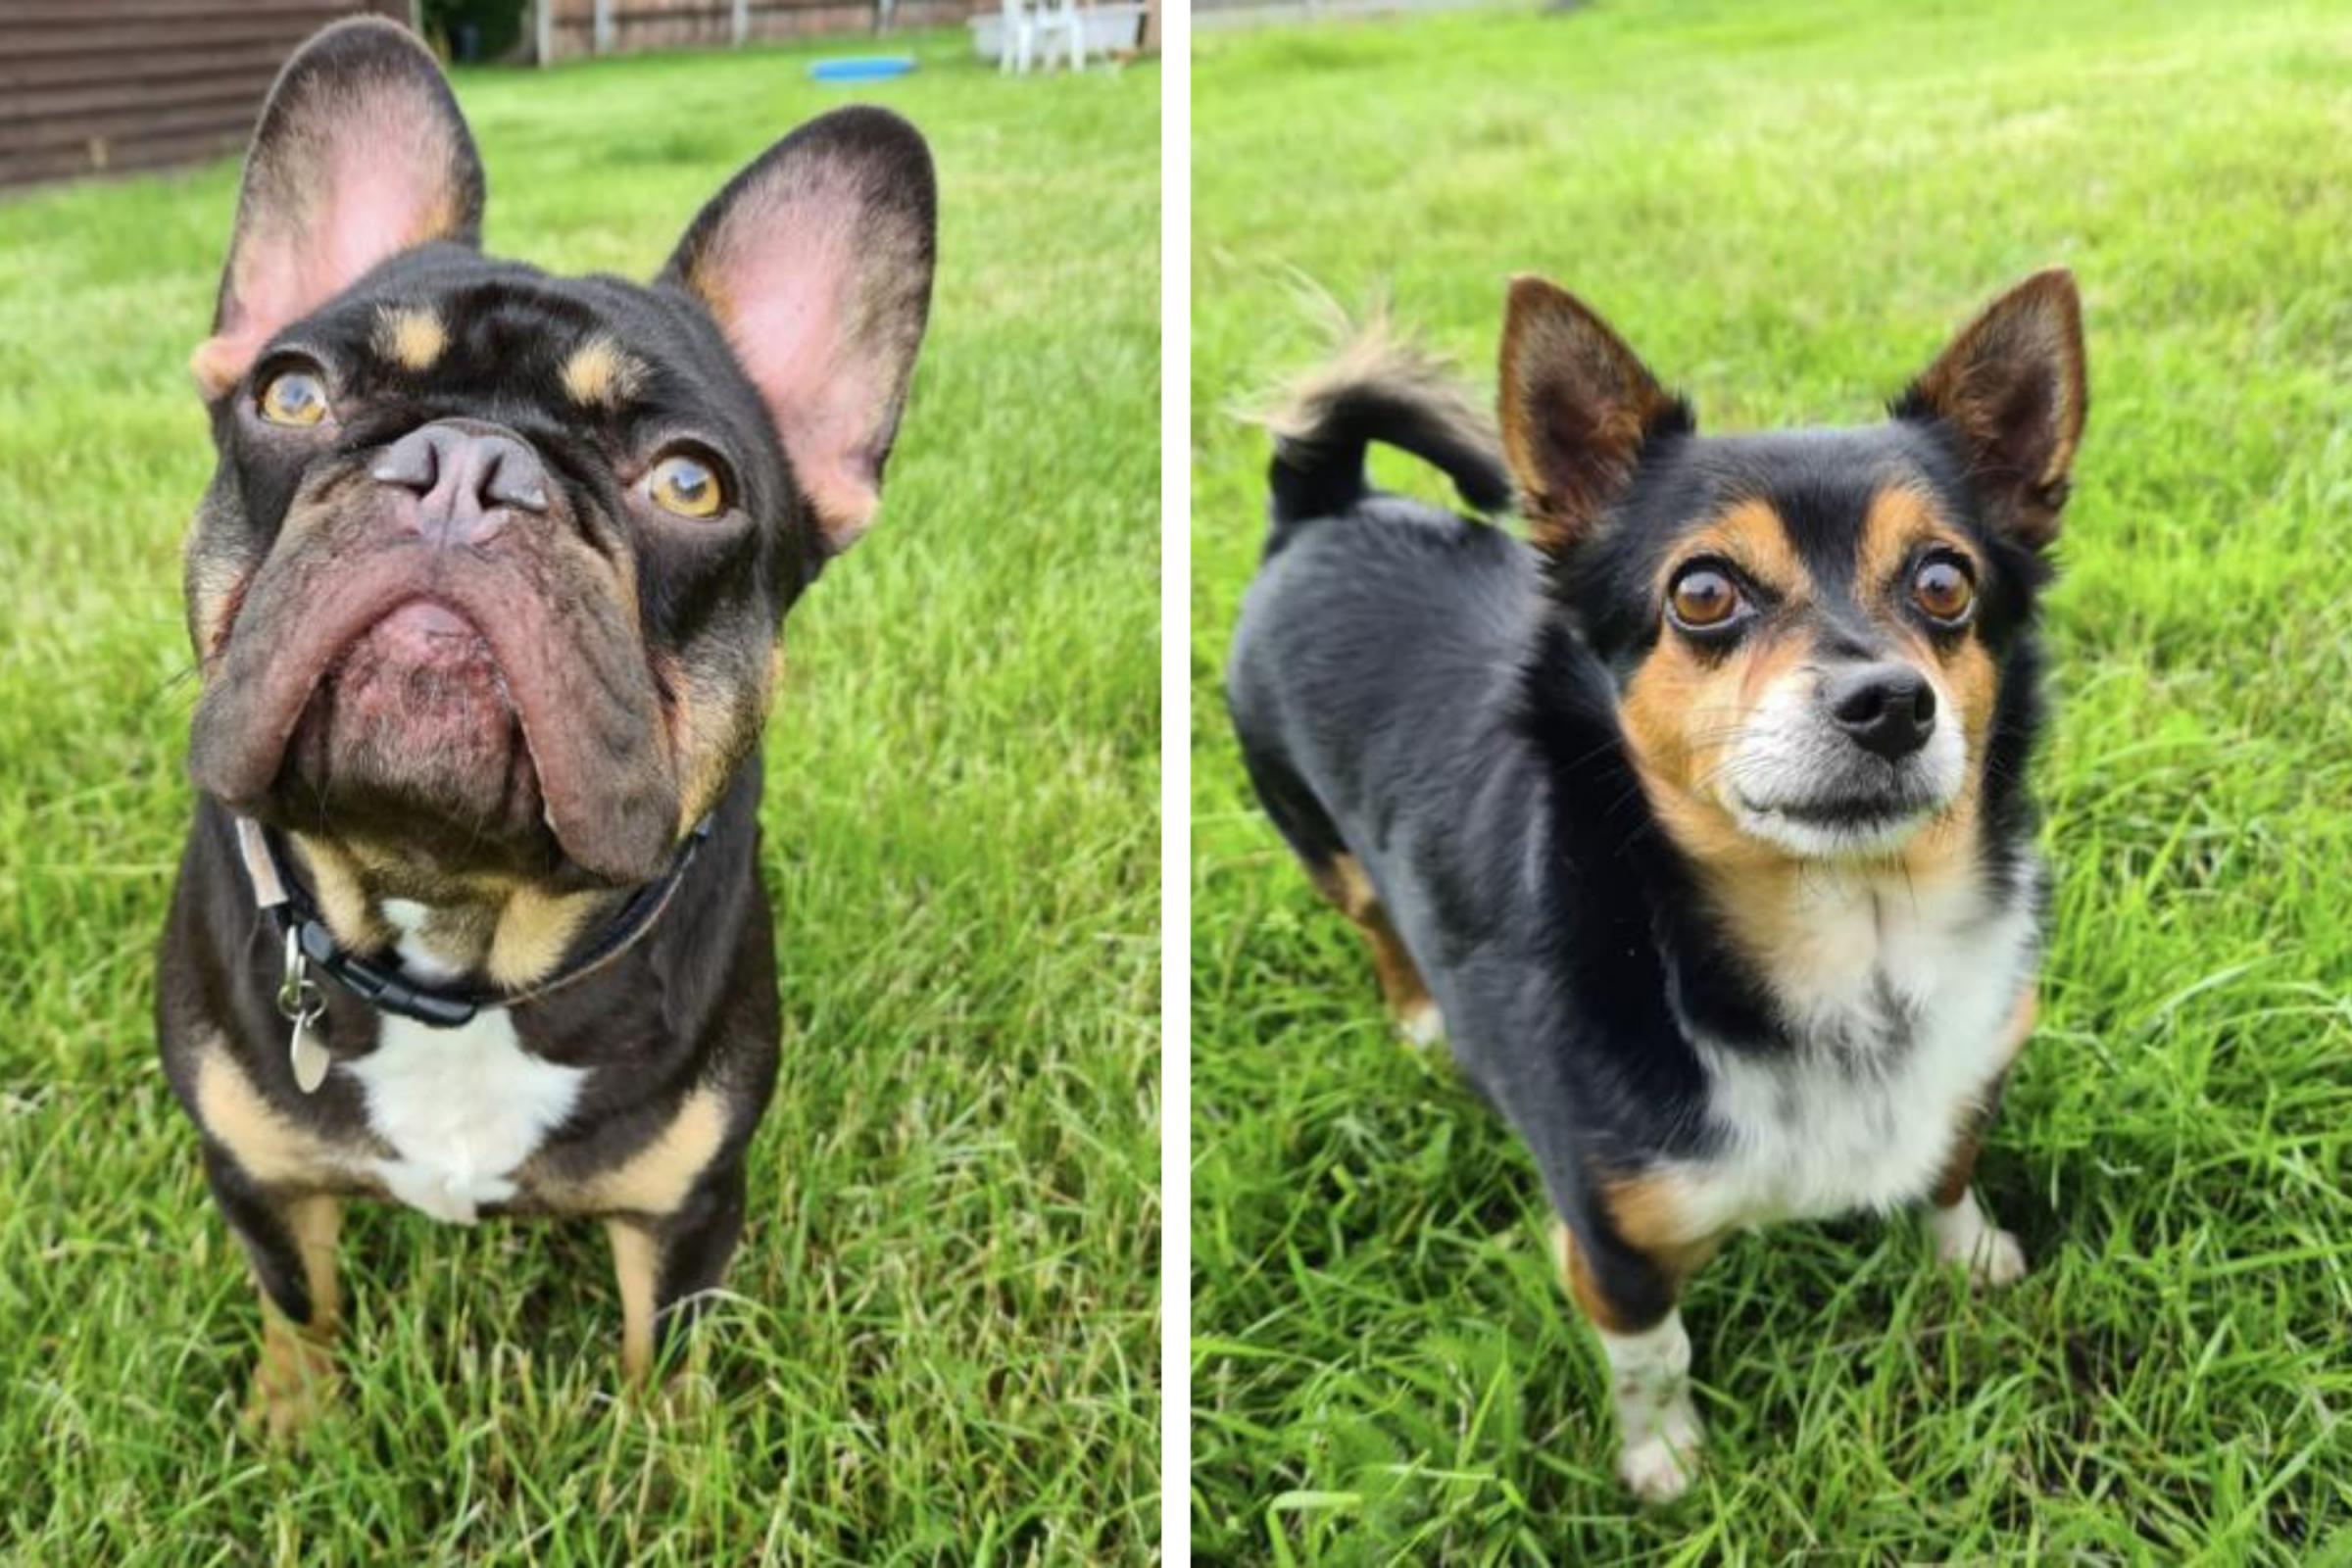 Dashing Clacton dog duo need a new family home